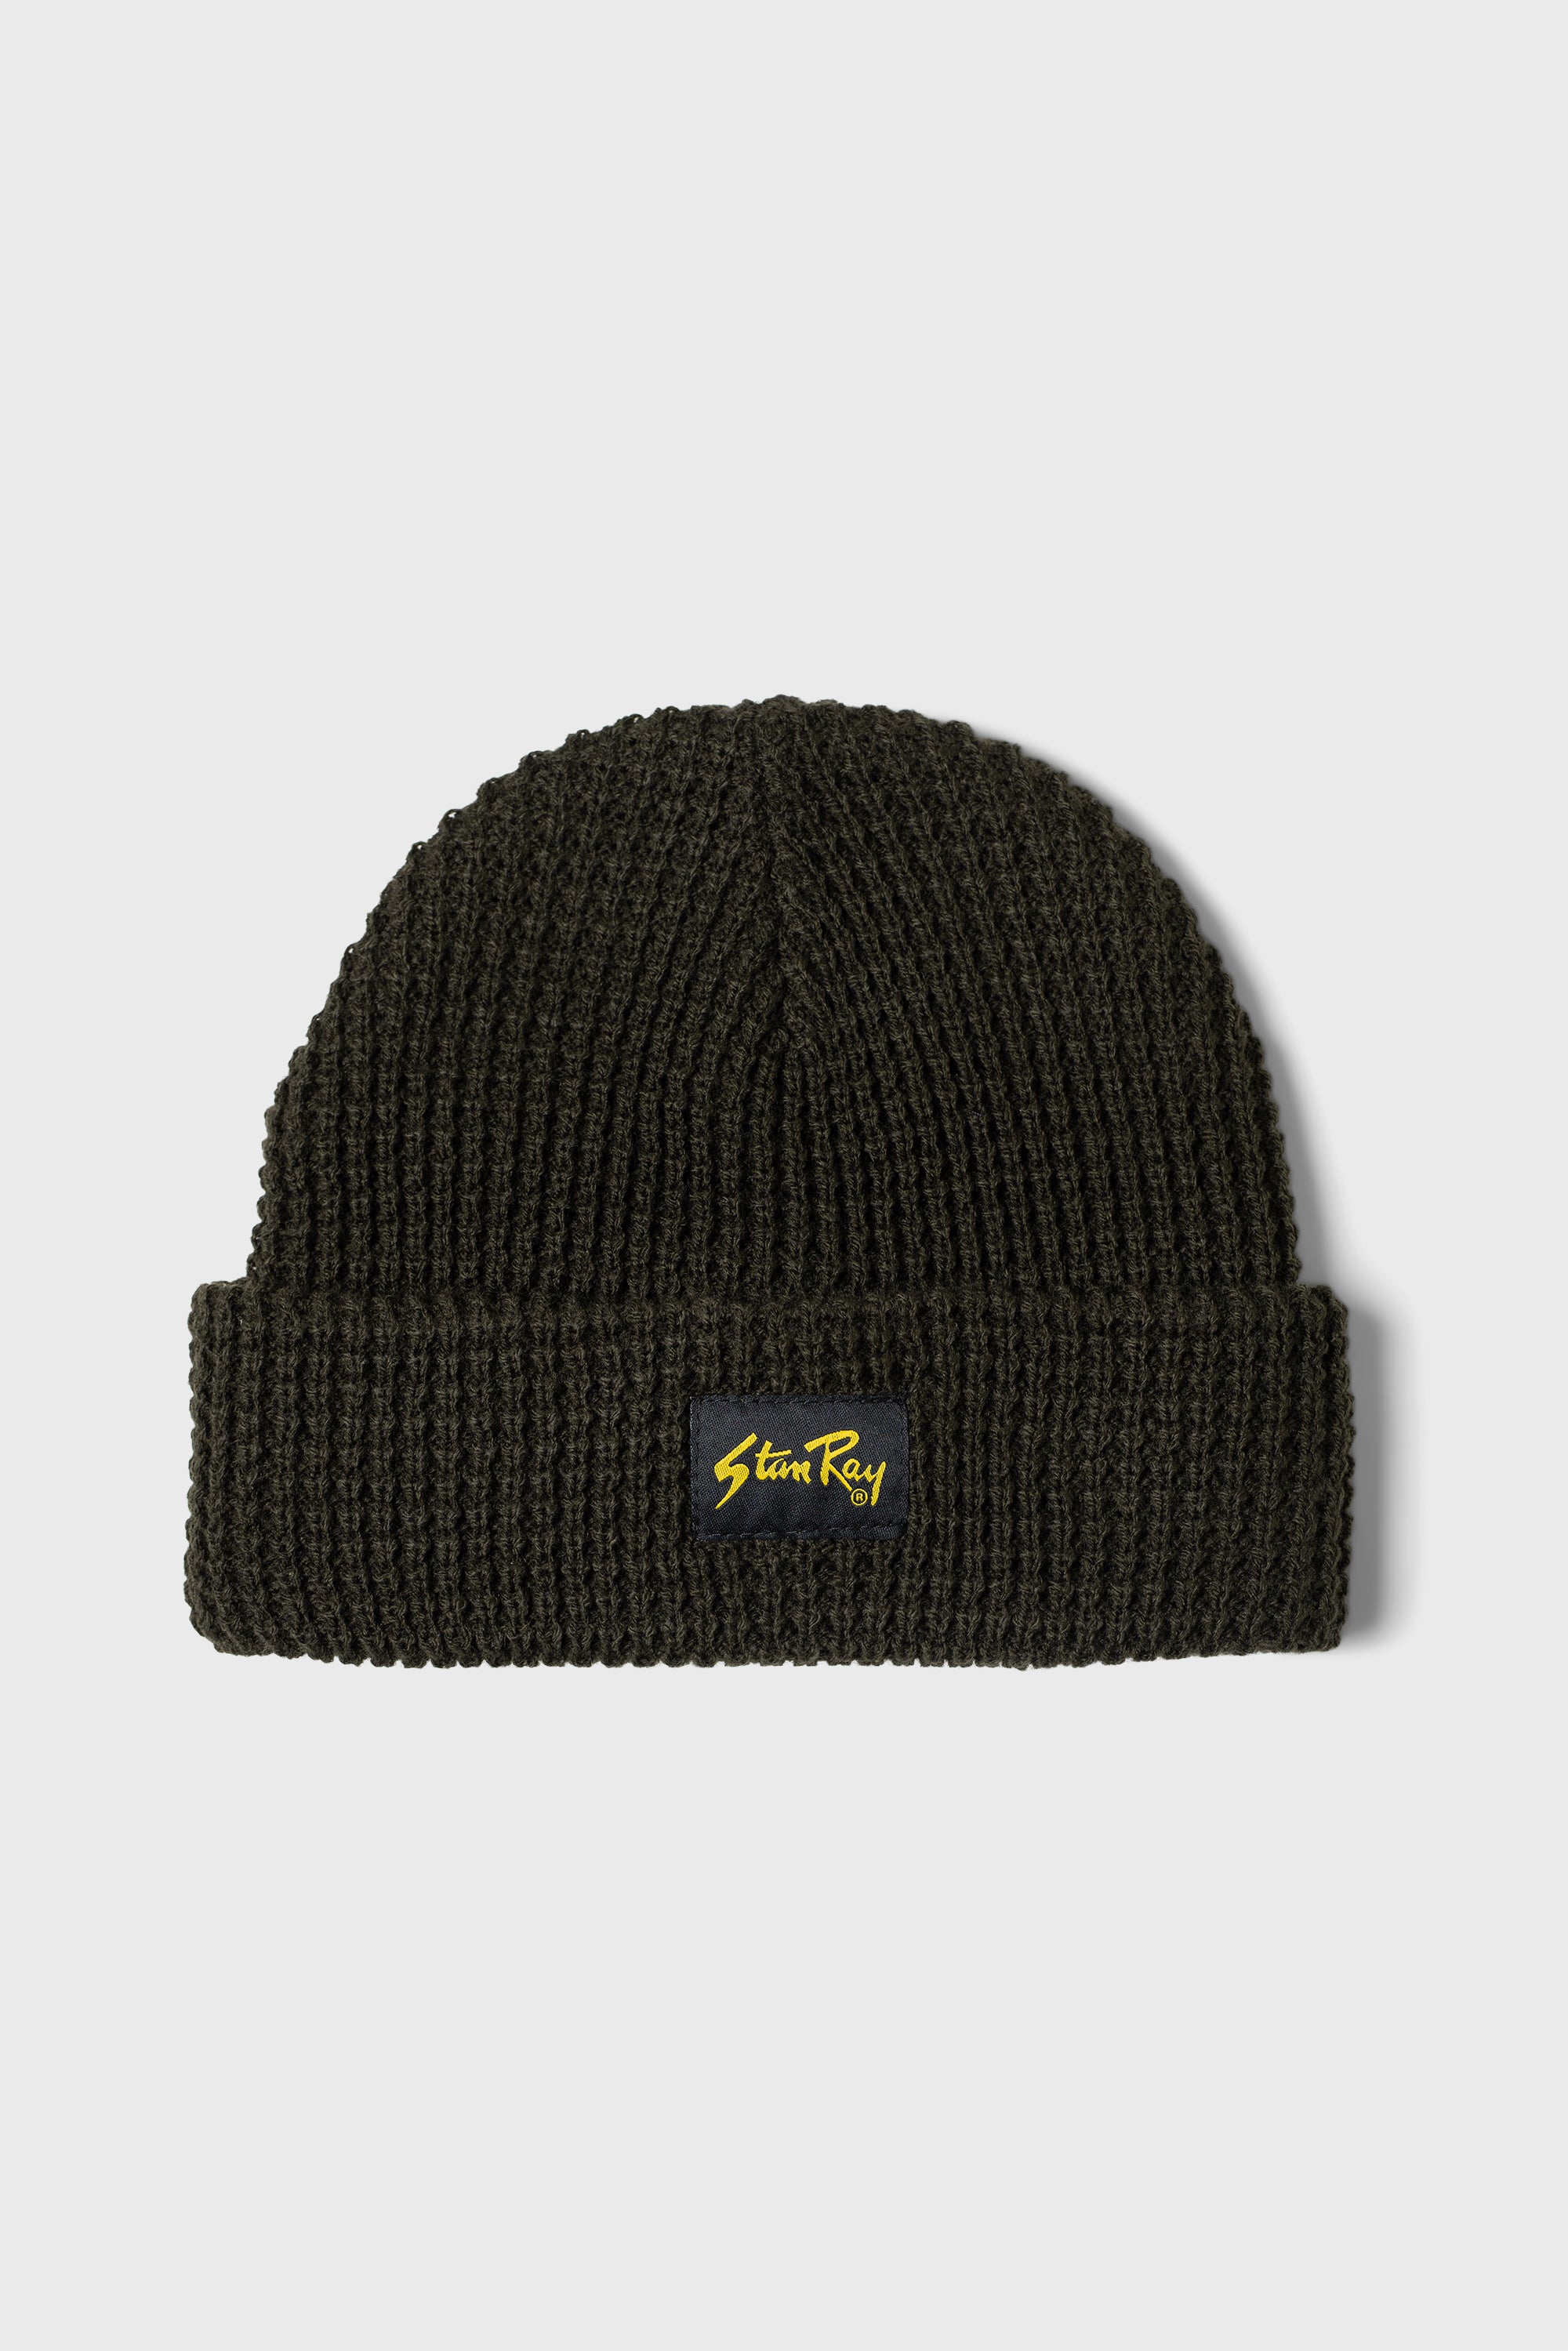 Stan Ray  Patch Beanie - Olive